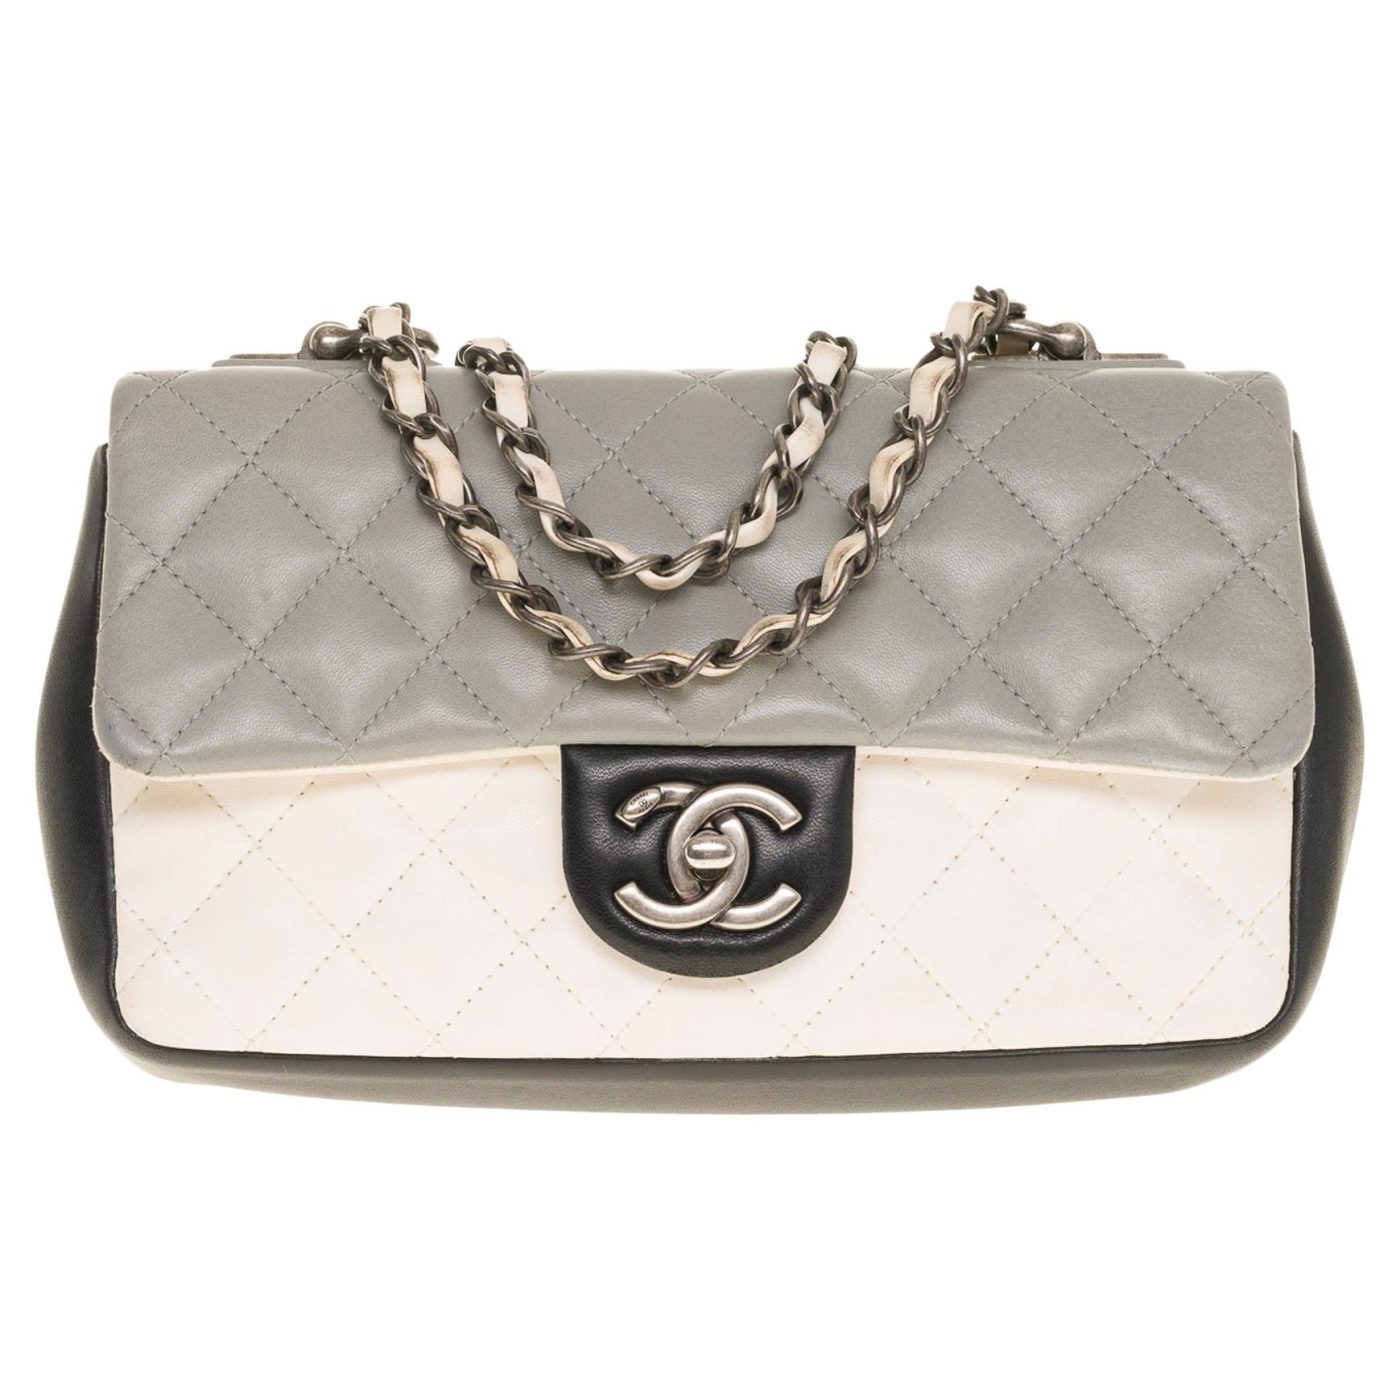 CHANEL CLASSIC SINGLE FLAP SHOULDER BAG IN GRAY, BLACK AND WHITE QUILTED LAMBSKIN, 21ST CENTURY